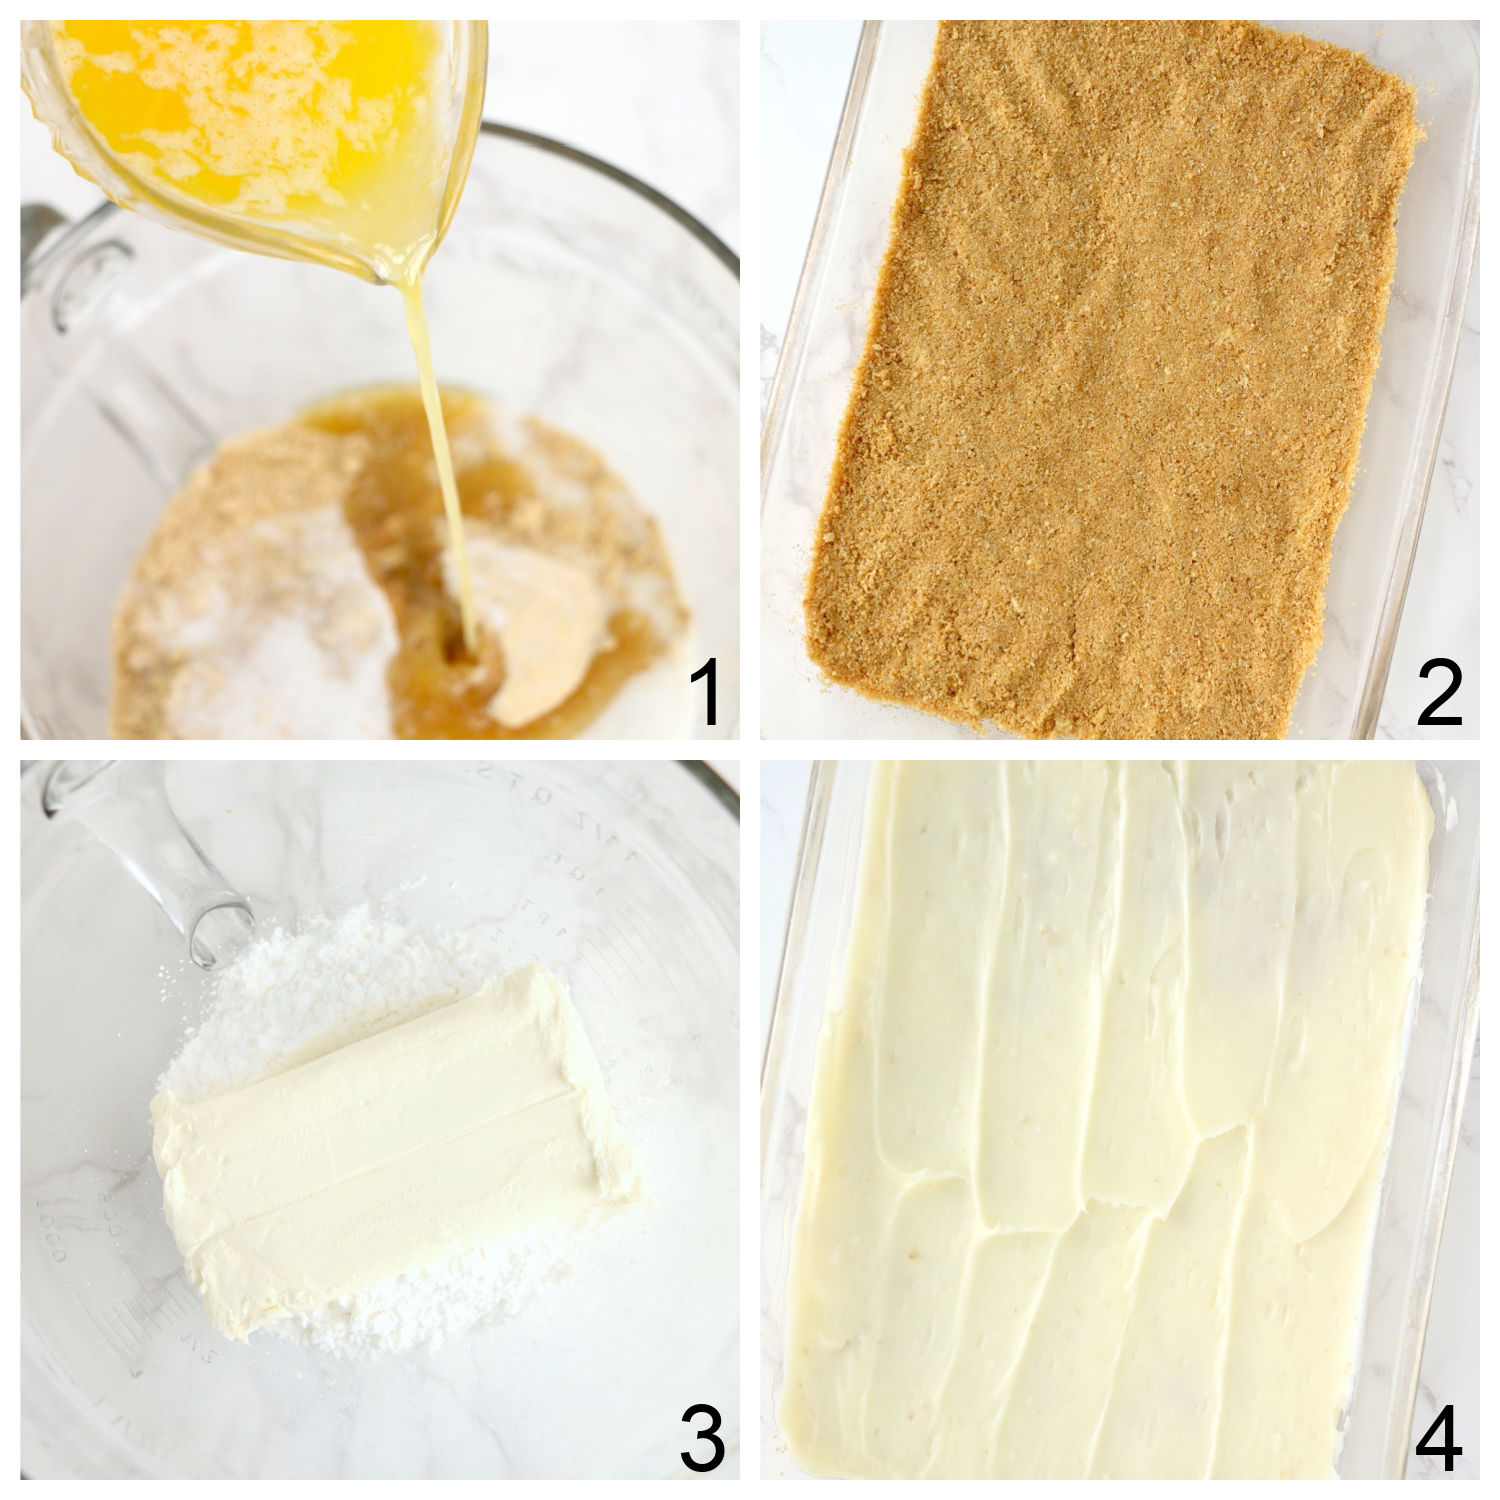 steps for making cheesecake